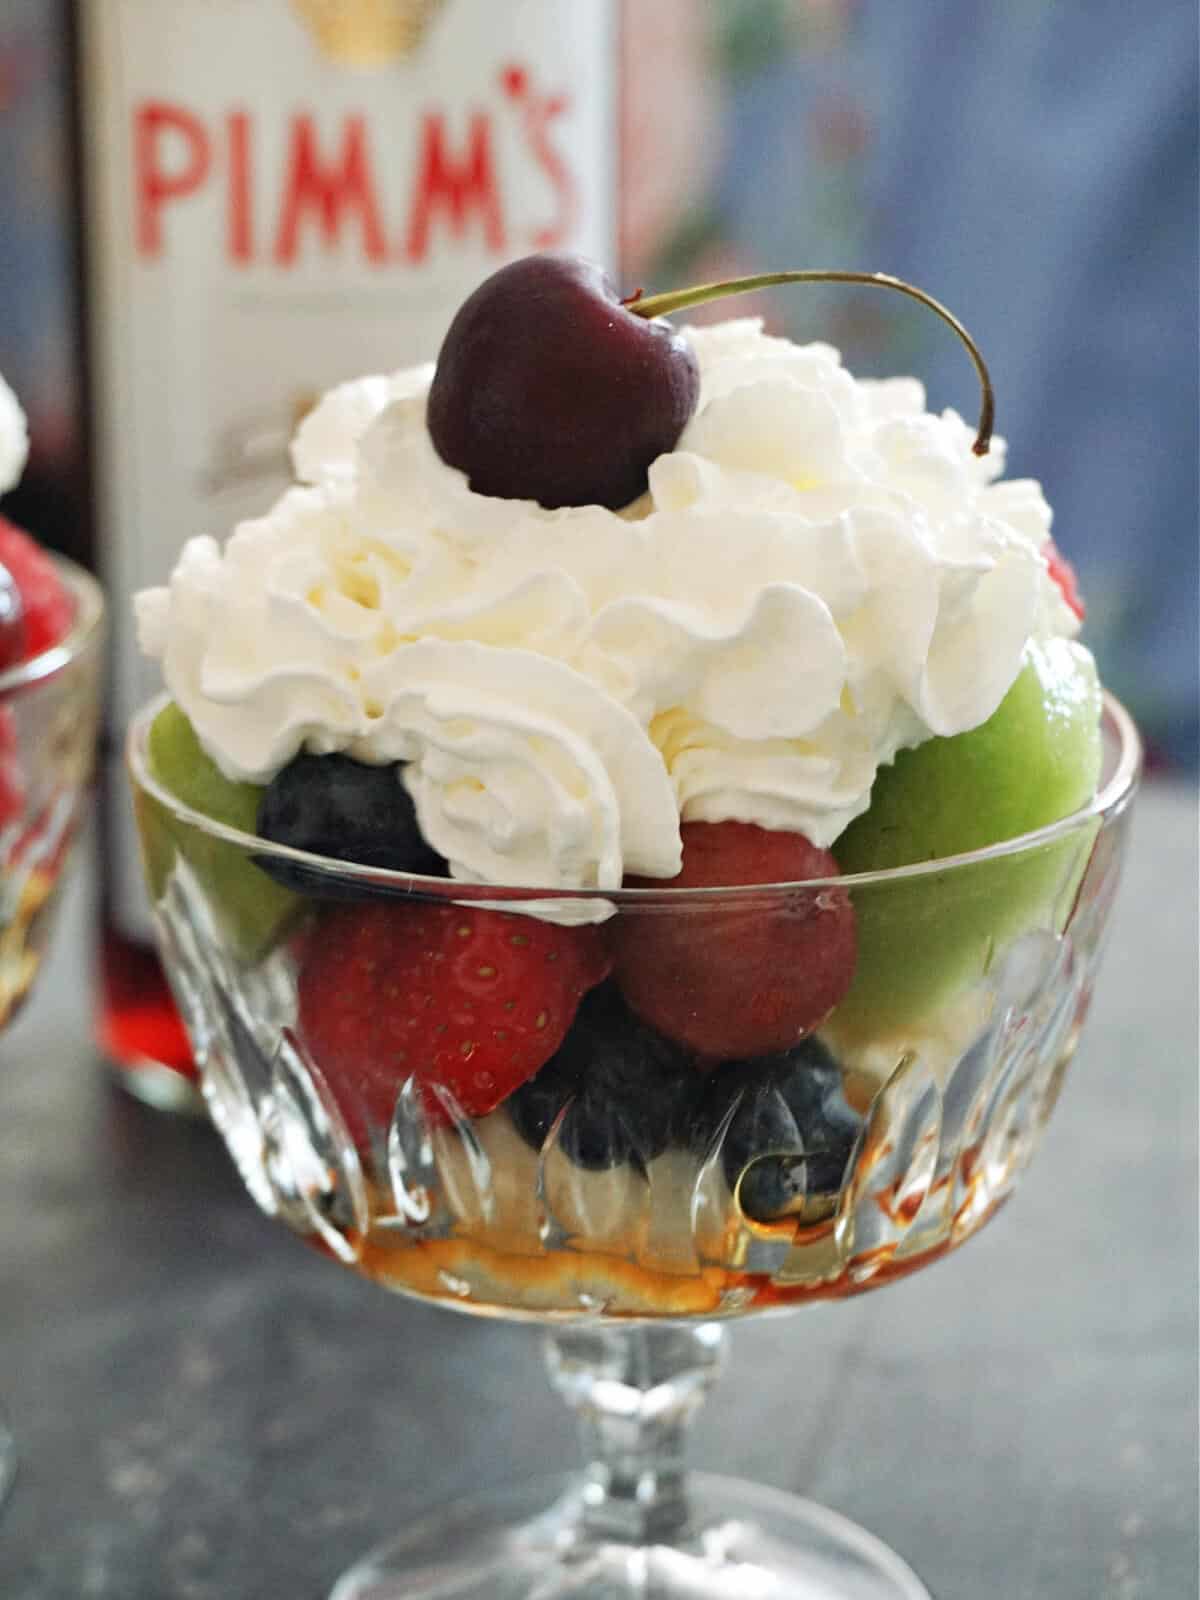 A glass of fruit salad topped with squirty cream and a cherry with a bottle of Pimm's in the background.